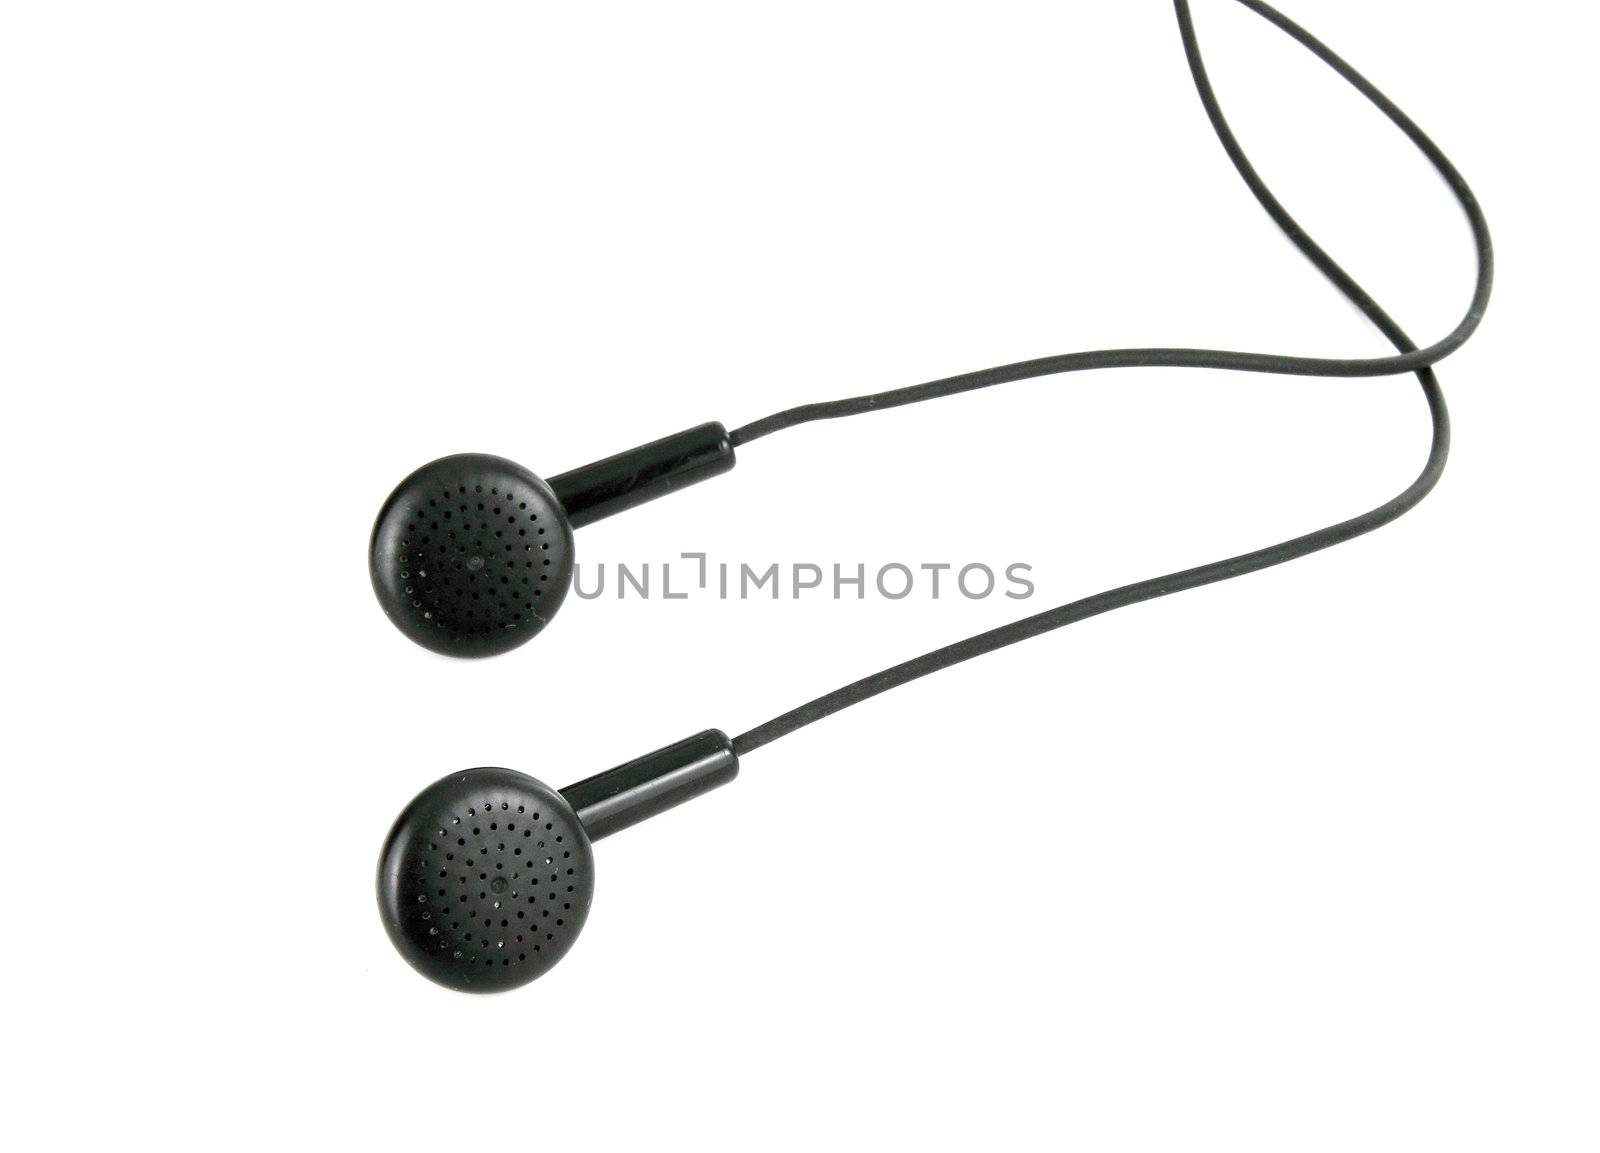 Modern portable audio earphones, isolated on a white background by geargodz